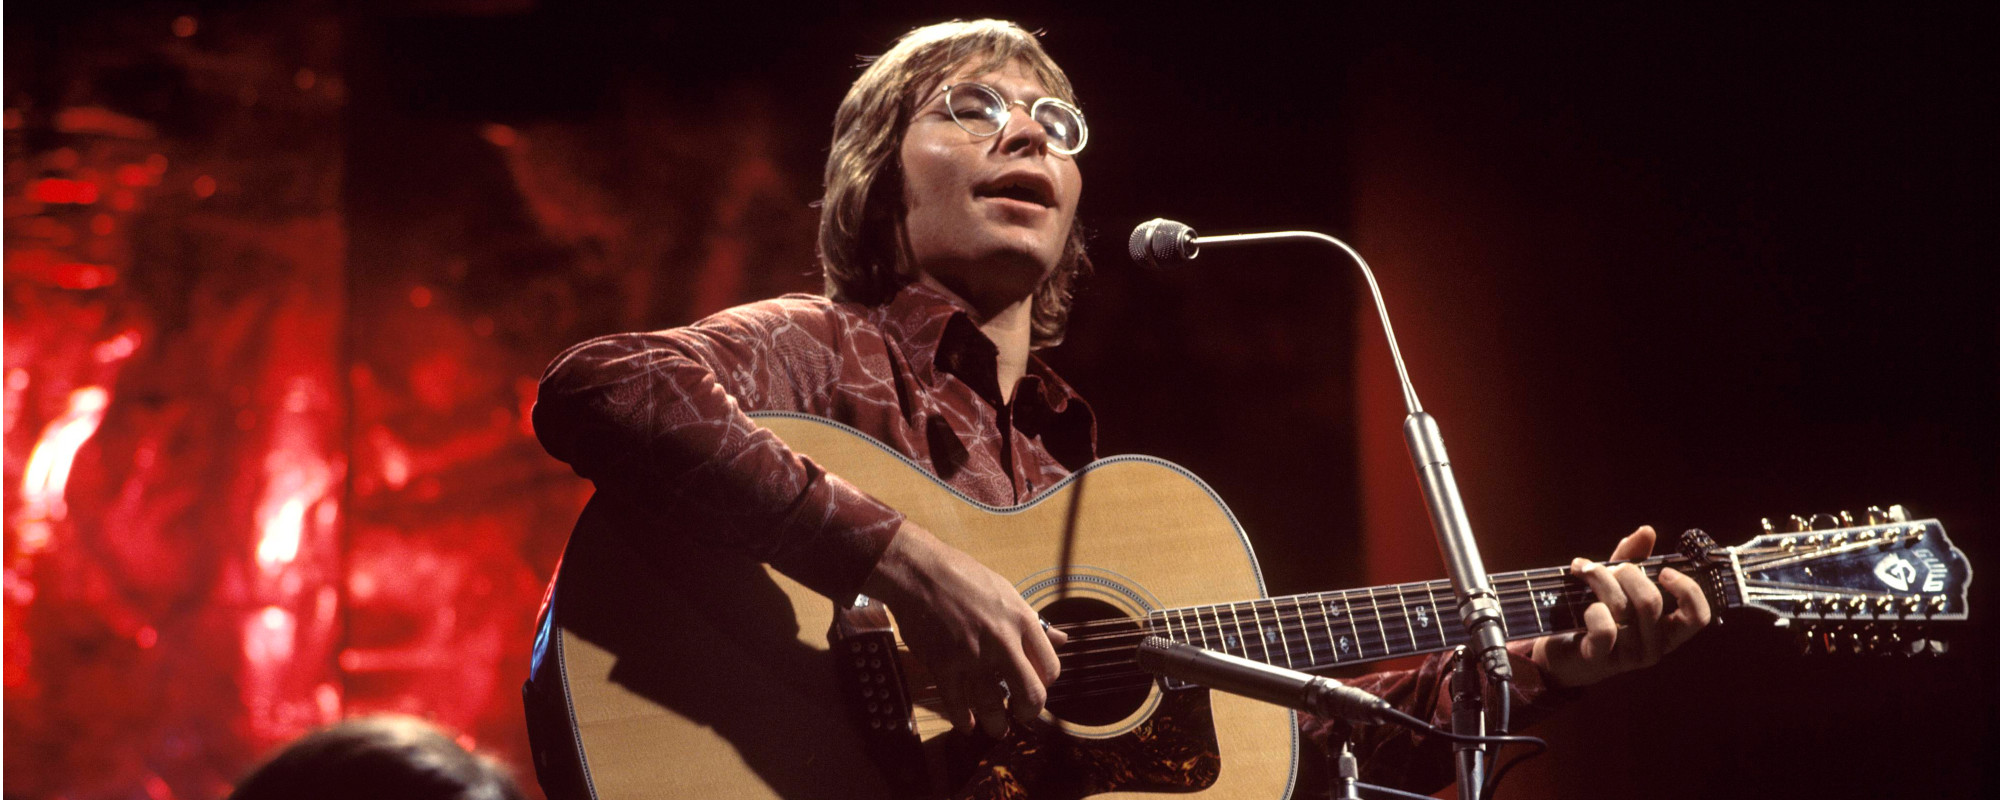 Teacher Shocked When Middle School Classroom Goes Bonkers for John Denver Classic, Sings Along to Every Word